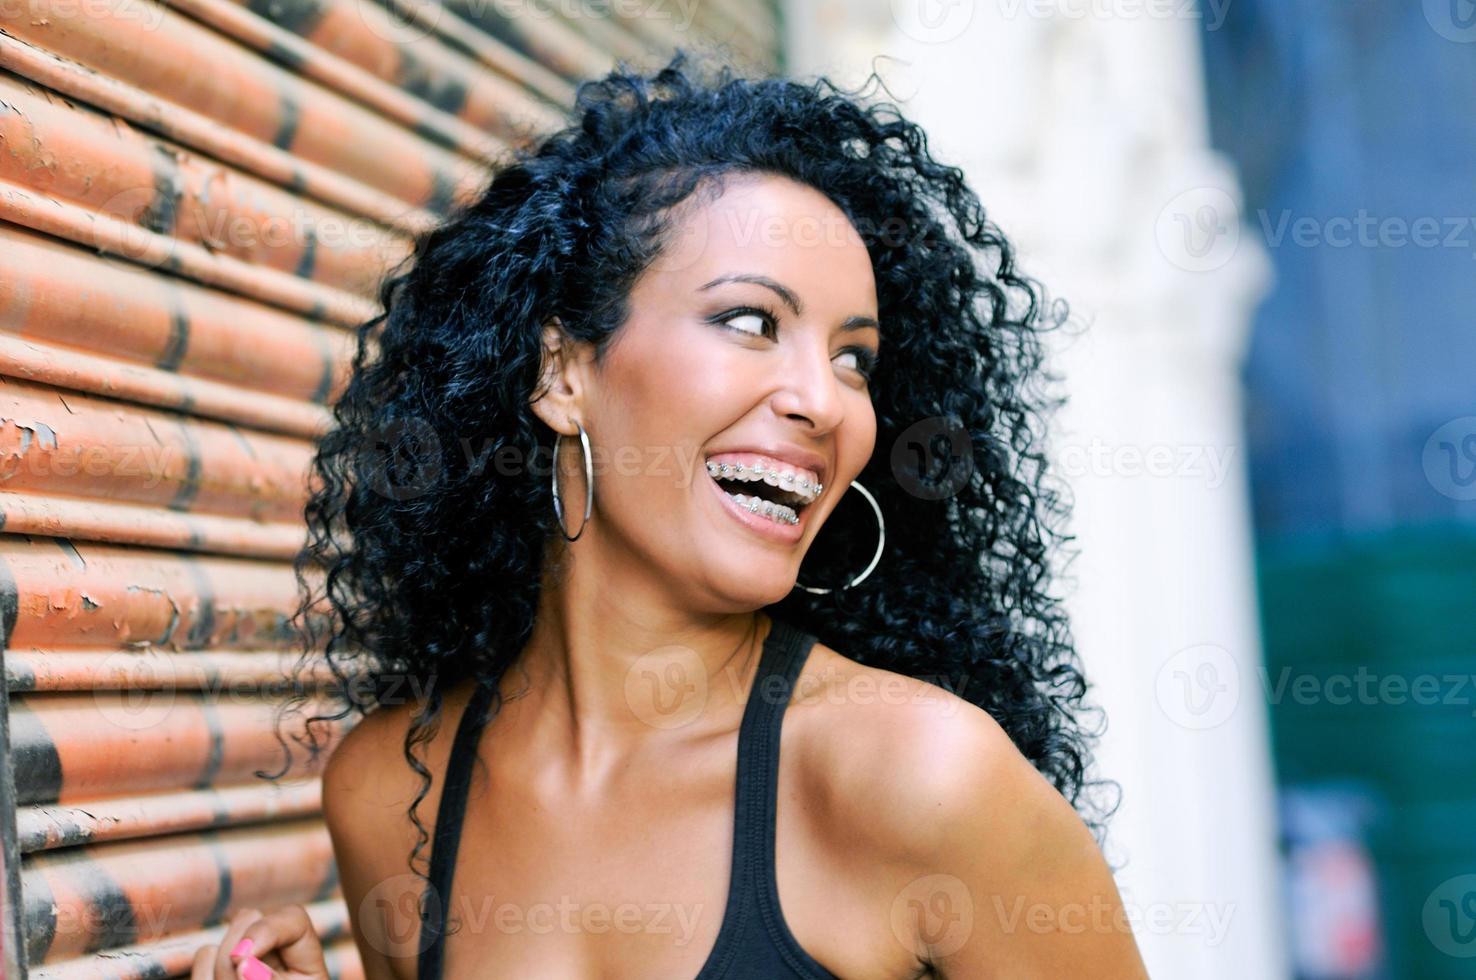 Young black woman smiling with braces photo